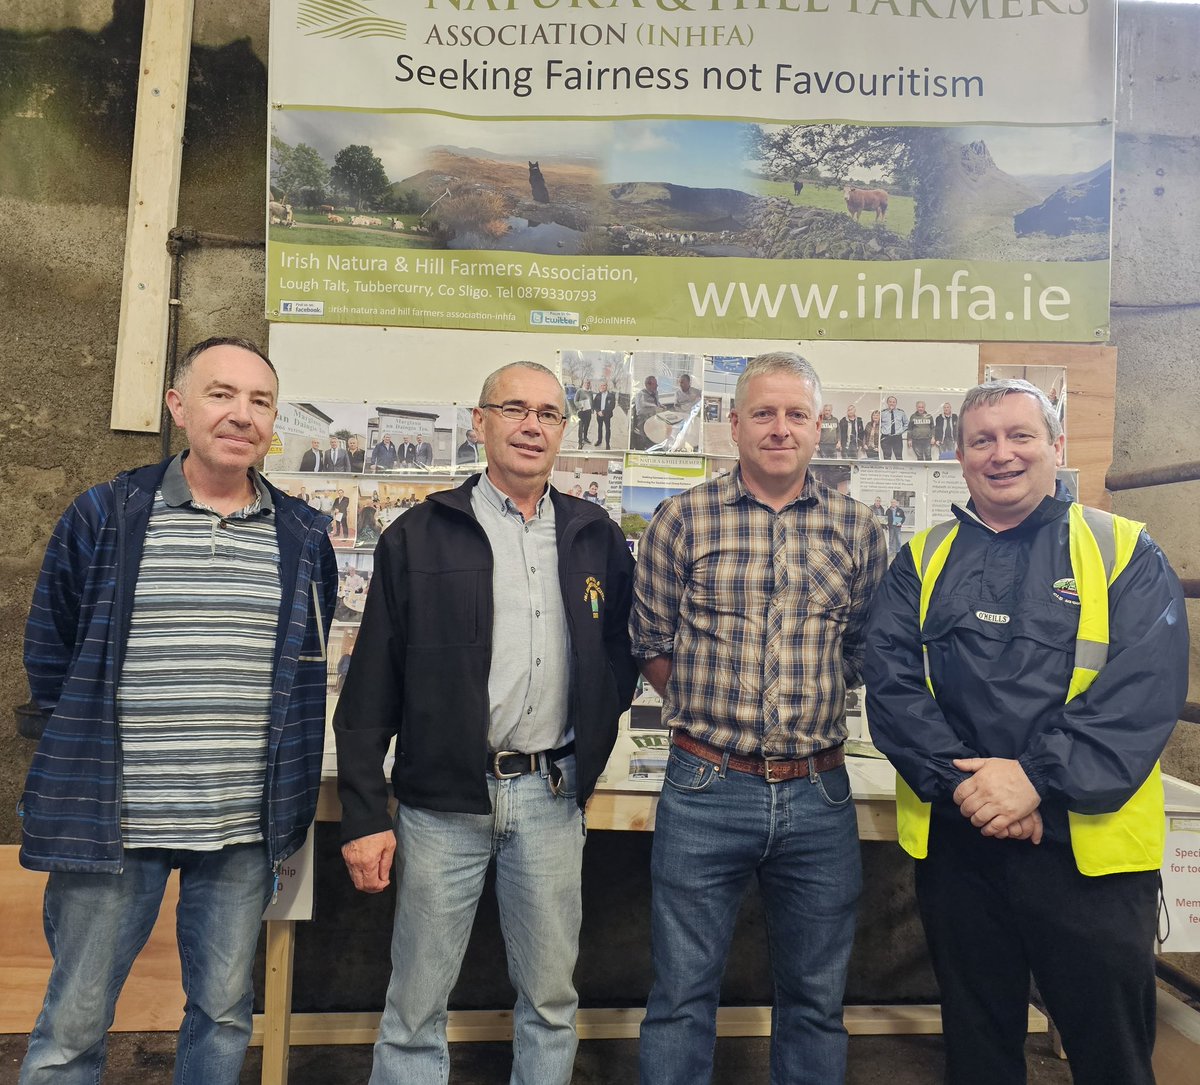 A great day at West Kerry Agricultural Show. Well done to Cathaoirleach Derry Ó Murchú, all of the Committee and Billy Kelleher MEP on performing the Official Opening. Good to catch up with Michael Healy Rae TD, Pa Daly TD and John Joe Fitzgerald from the INHFA. Ana lá ar fad!